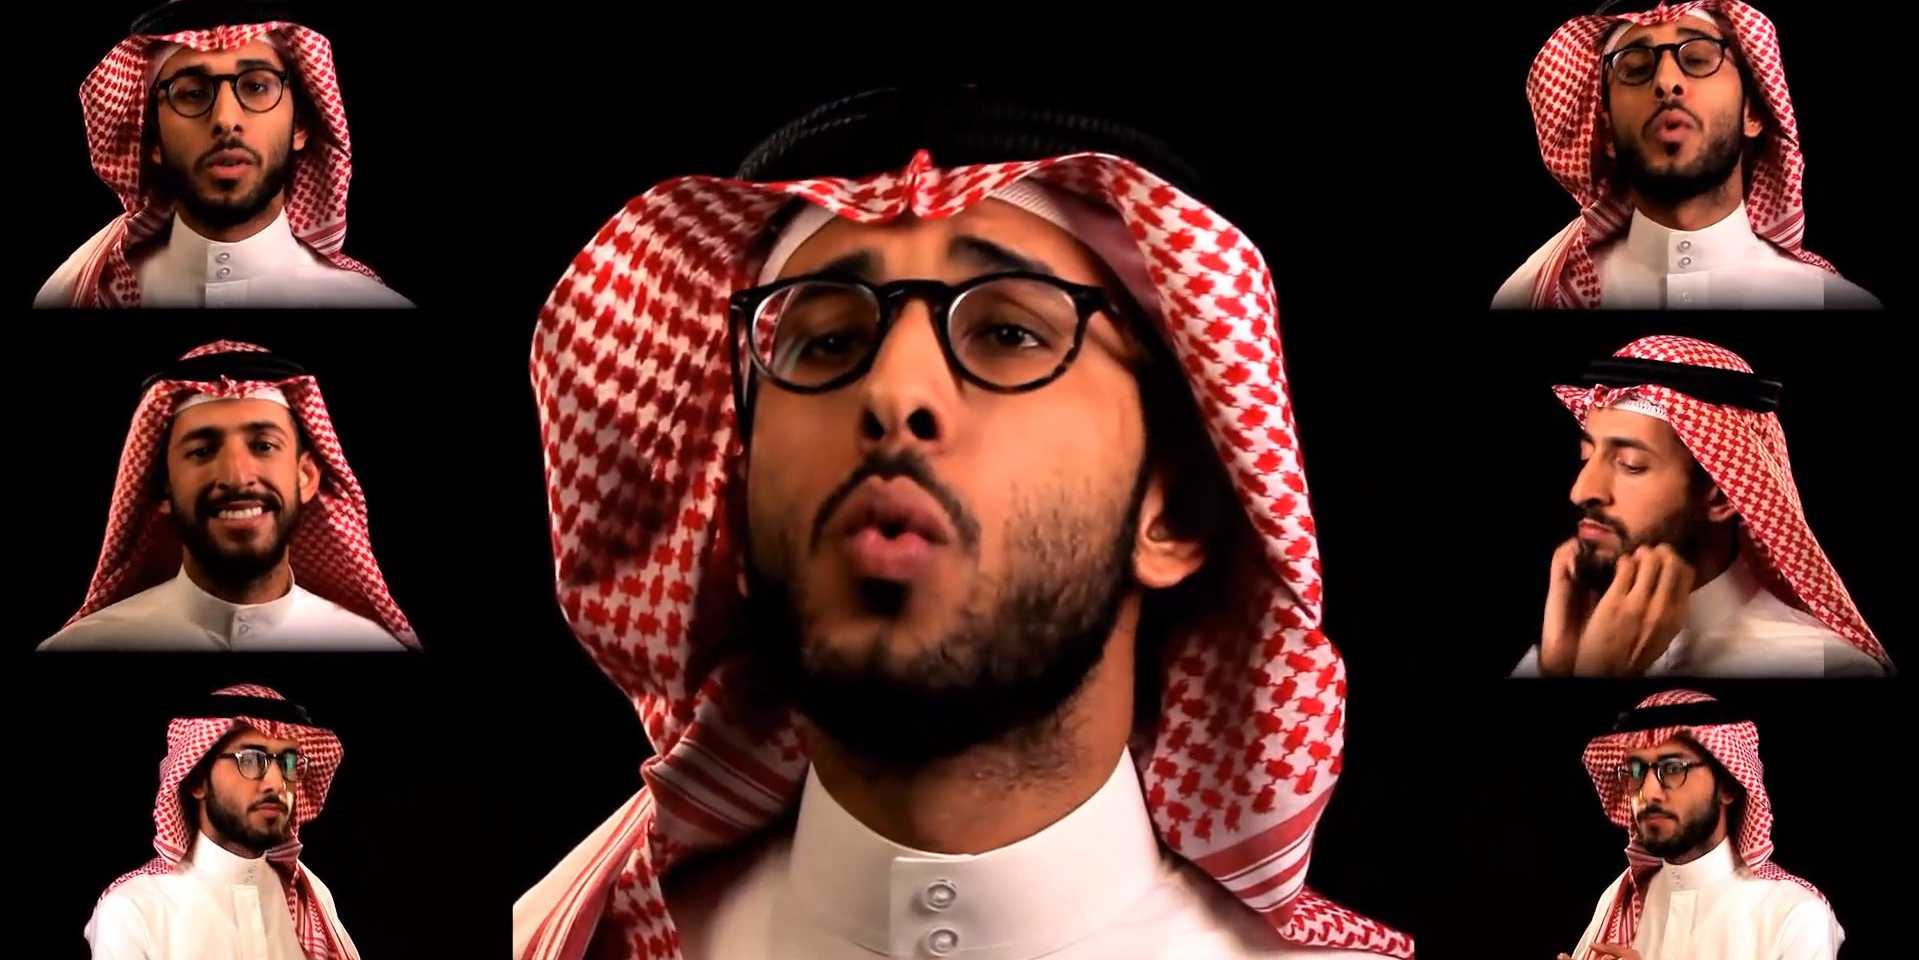 4 Funny Arab Videos You'll Want to Watch Over and Over Again